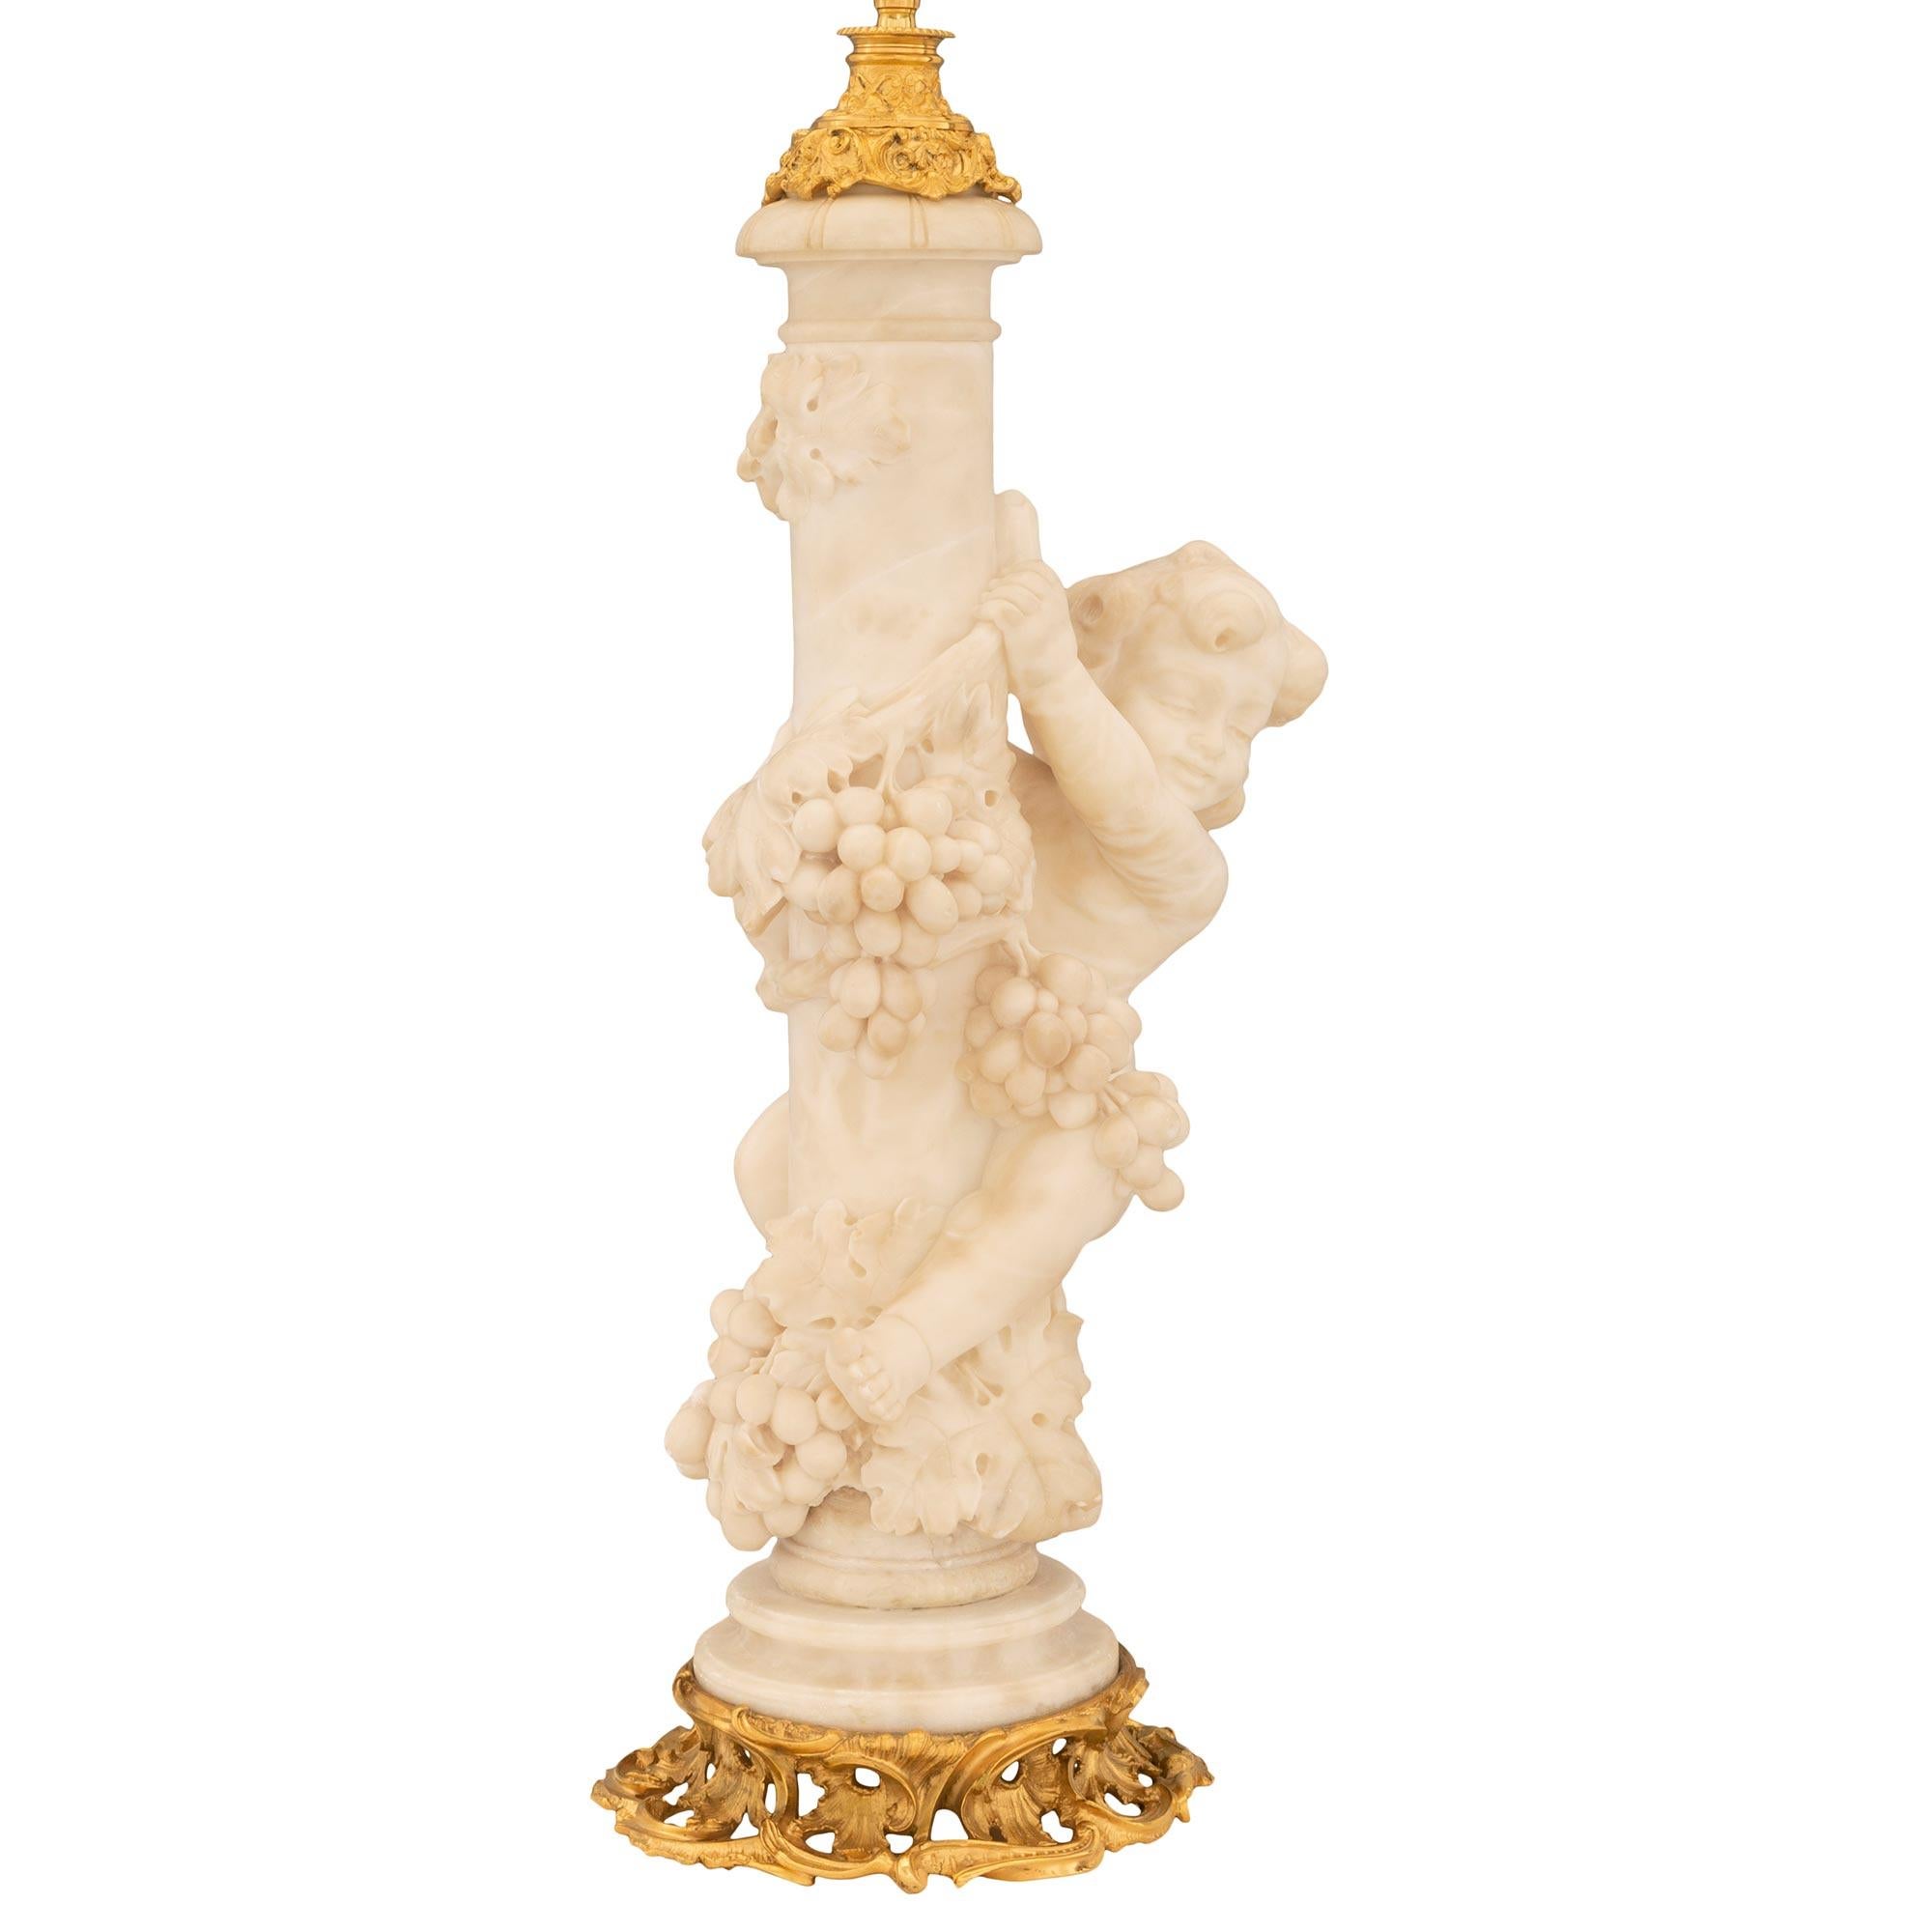 An exceptional and most unique French, 19th century, Louis XV St. Ormolu and Alabaster lamp. The lamp is raised by a beautiful pierced scrolled foliate ormolu base with richly chased designs in a superb satin and burnished finish. The alabaster